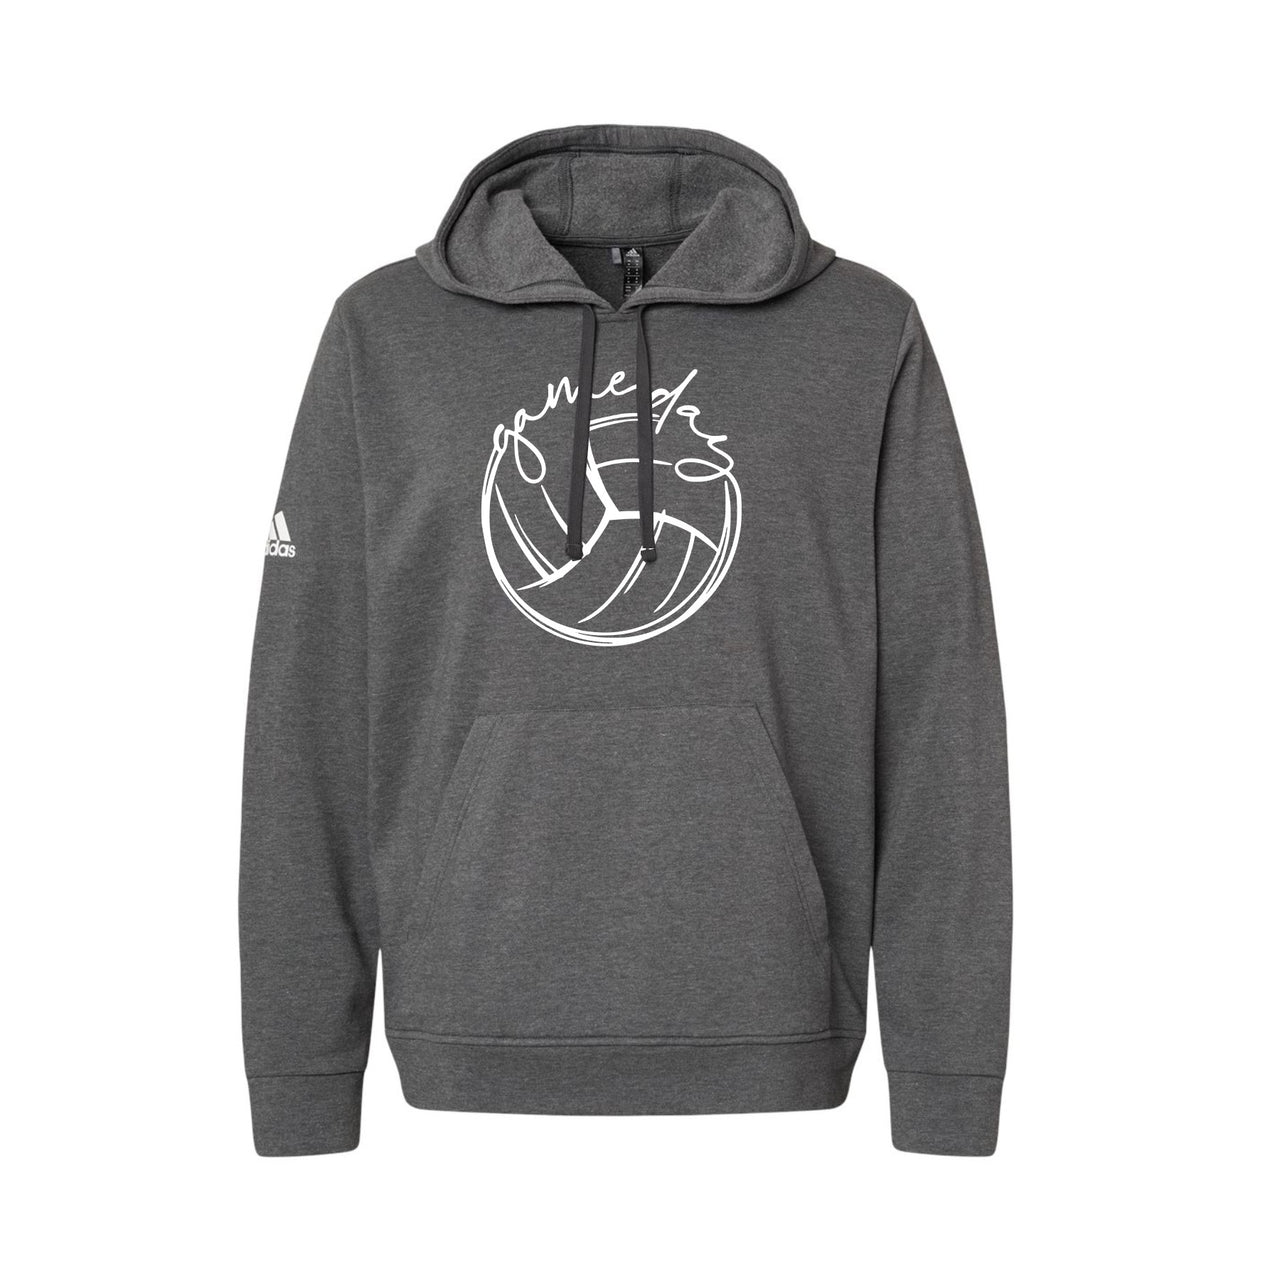 Adult - Unisex Adidas Hoodie (Volleyball Game Day)